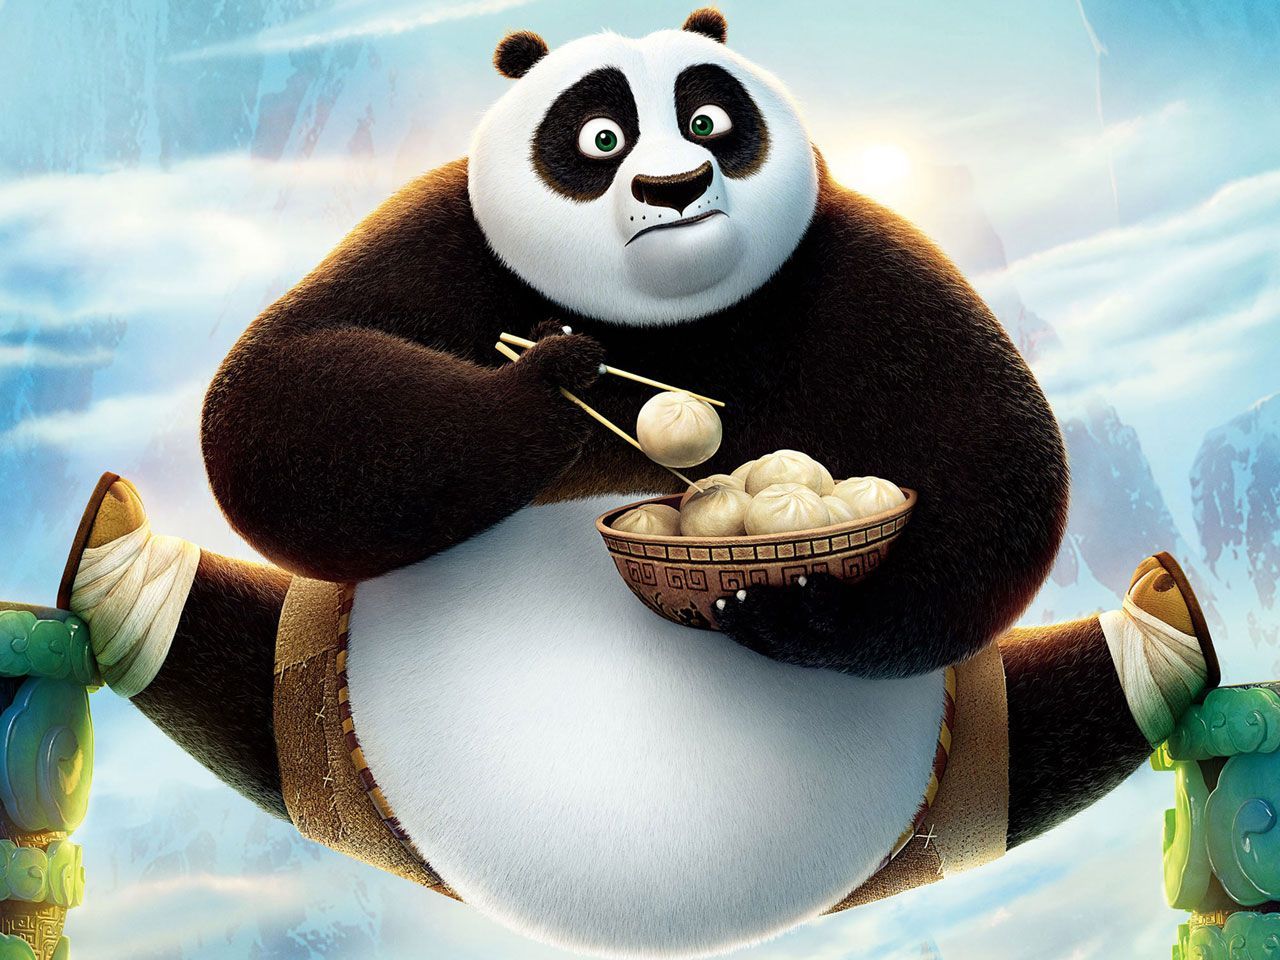 Have you watched Kung Fu Panda 3? Master Oogway said something to